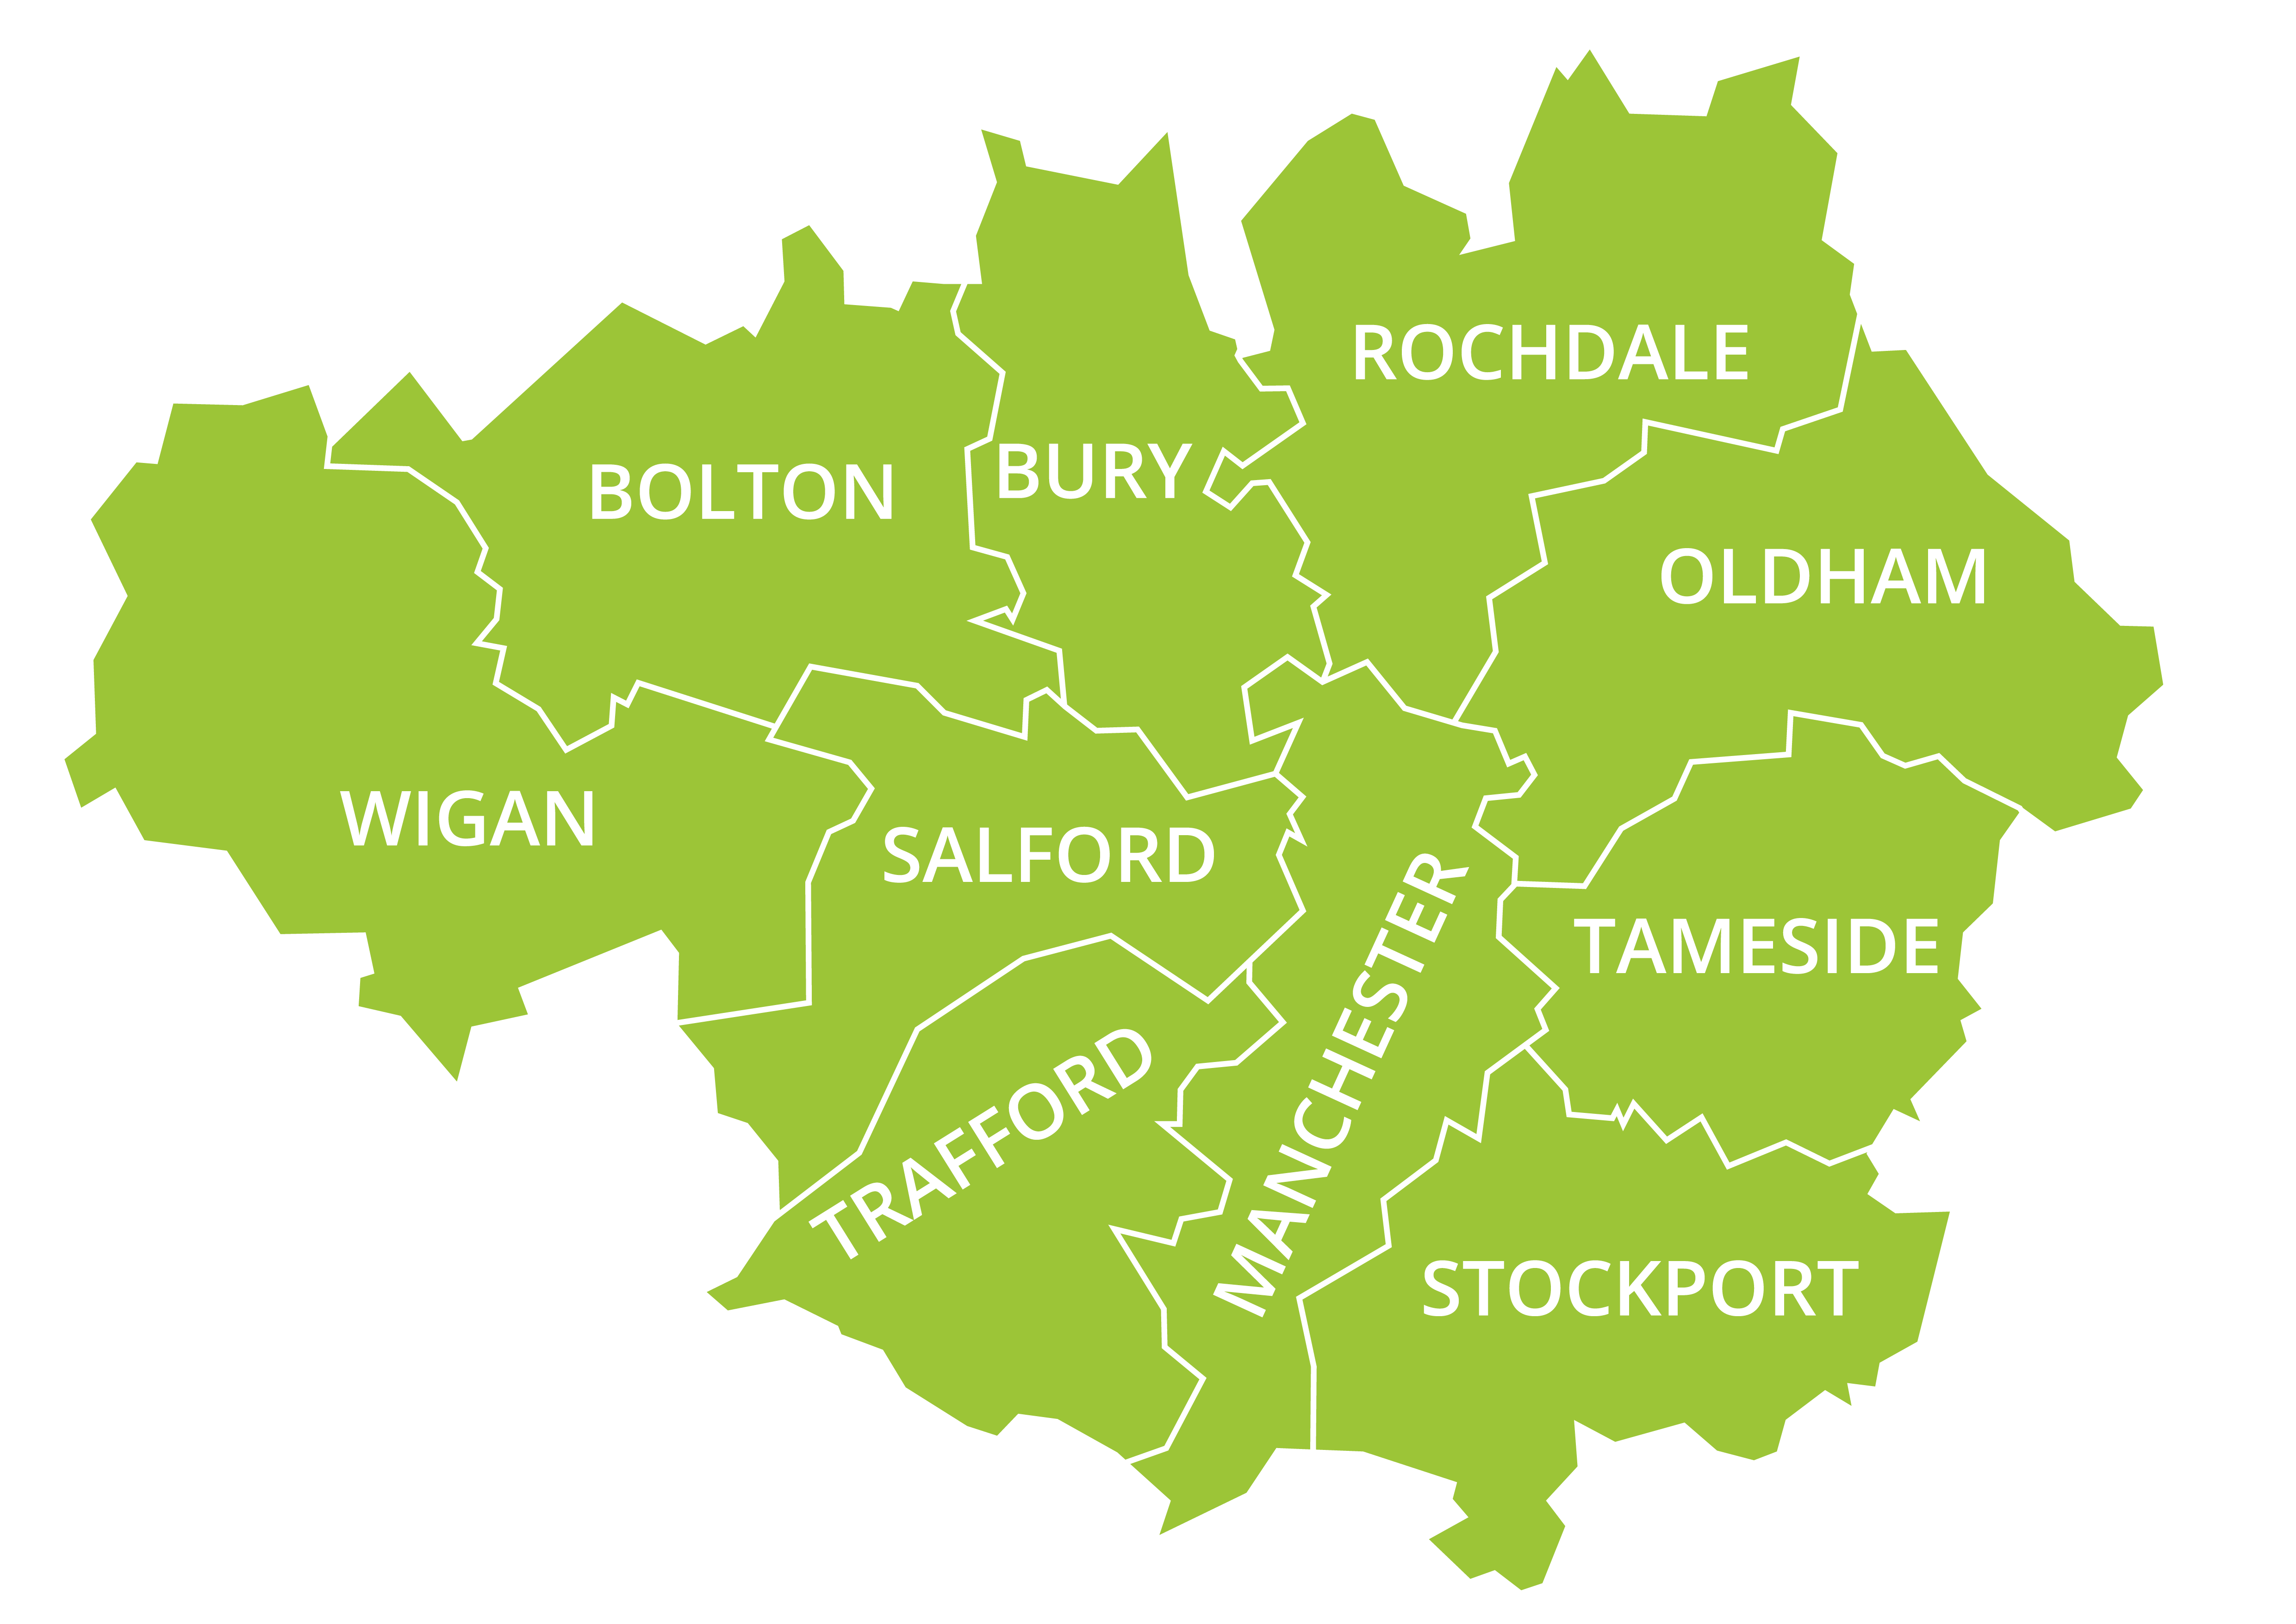 A green map of the Greater Manchester region with the 10 boroughs labelled: Manchester, Salford, Trafford, Bury, Tameside, Rochdale, Wigan, Bolton, Stockport and Oldham. 